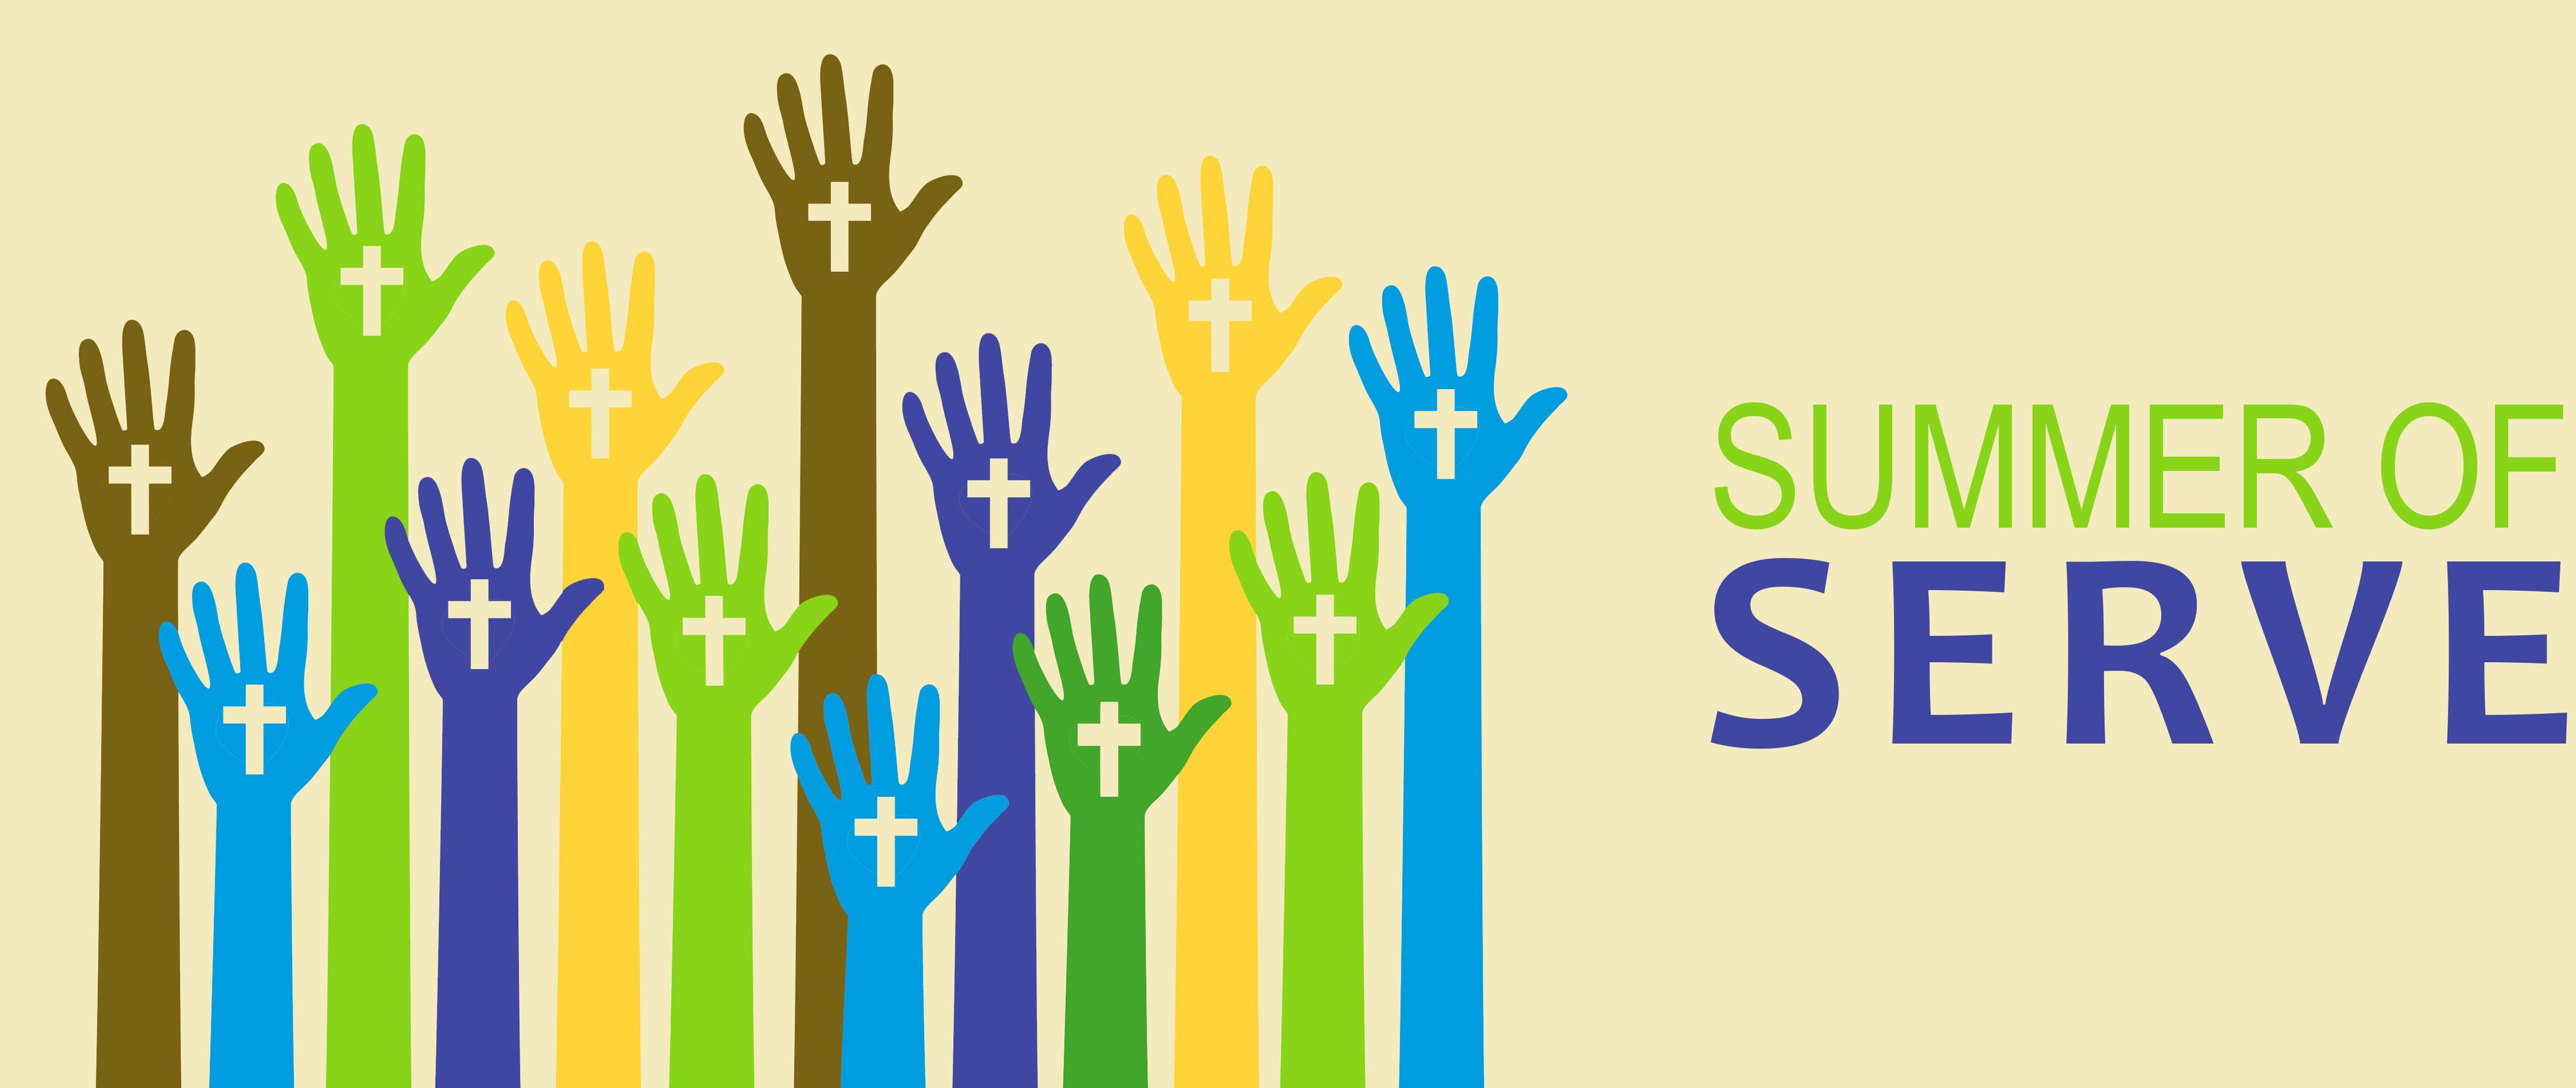 Join us for Summer of Serve in 2023!There are so many opportunities to give back to your community this year and to show God's love to our neighbors. We meet on most Saturday mornings throughout the summer. Click for more details